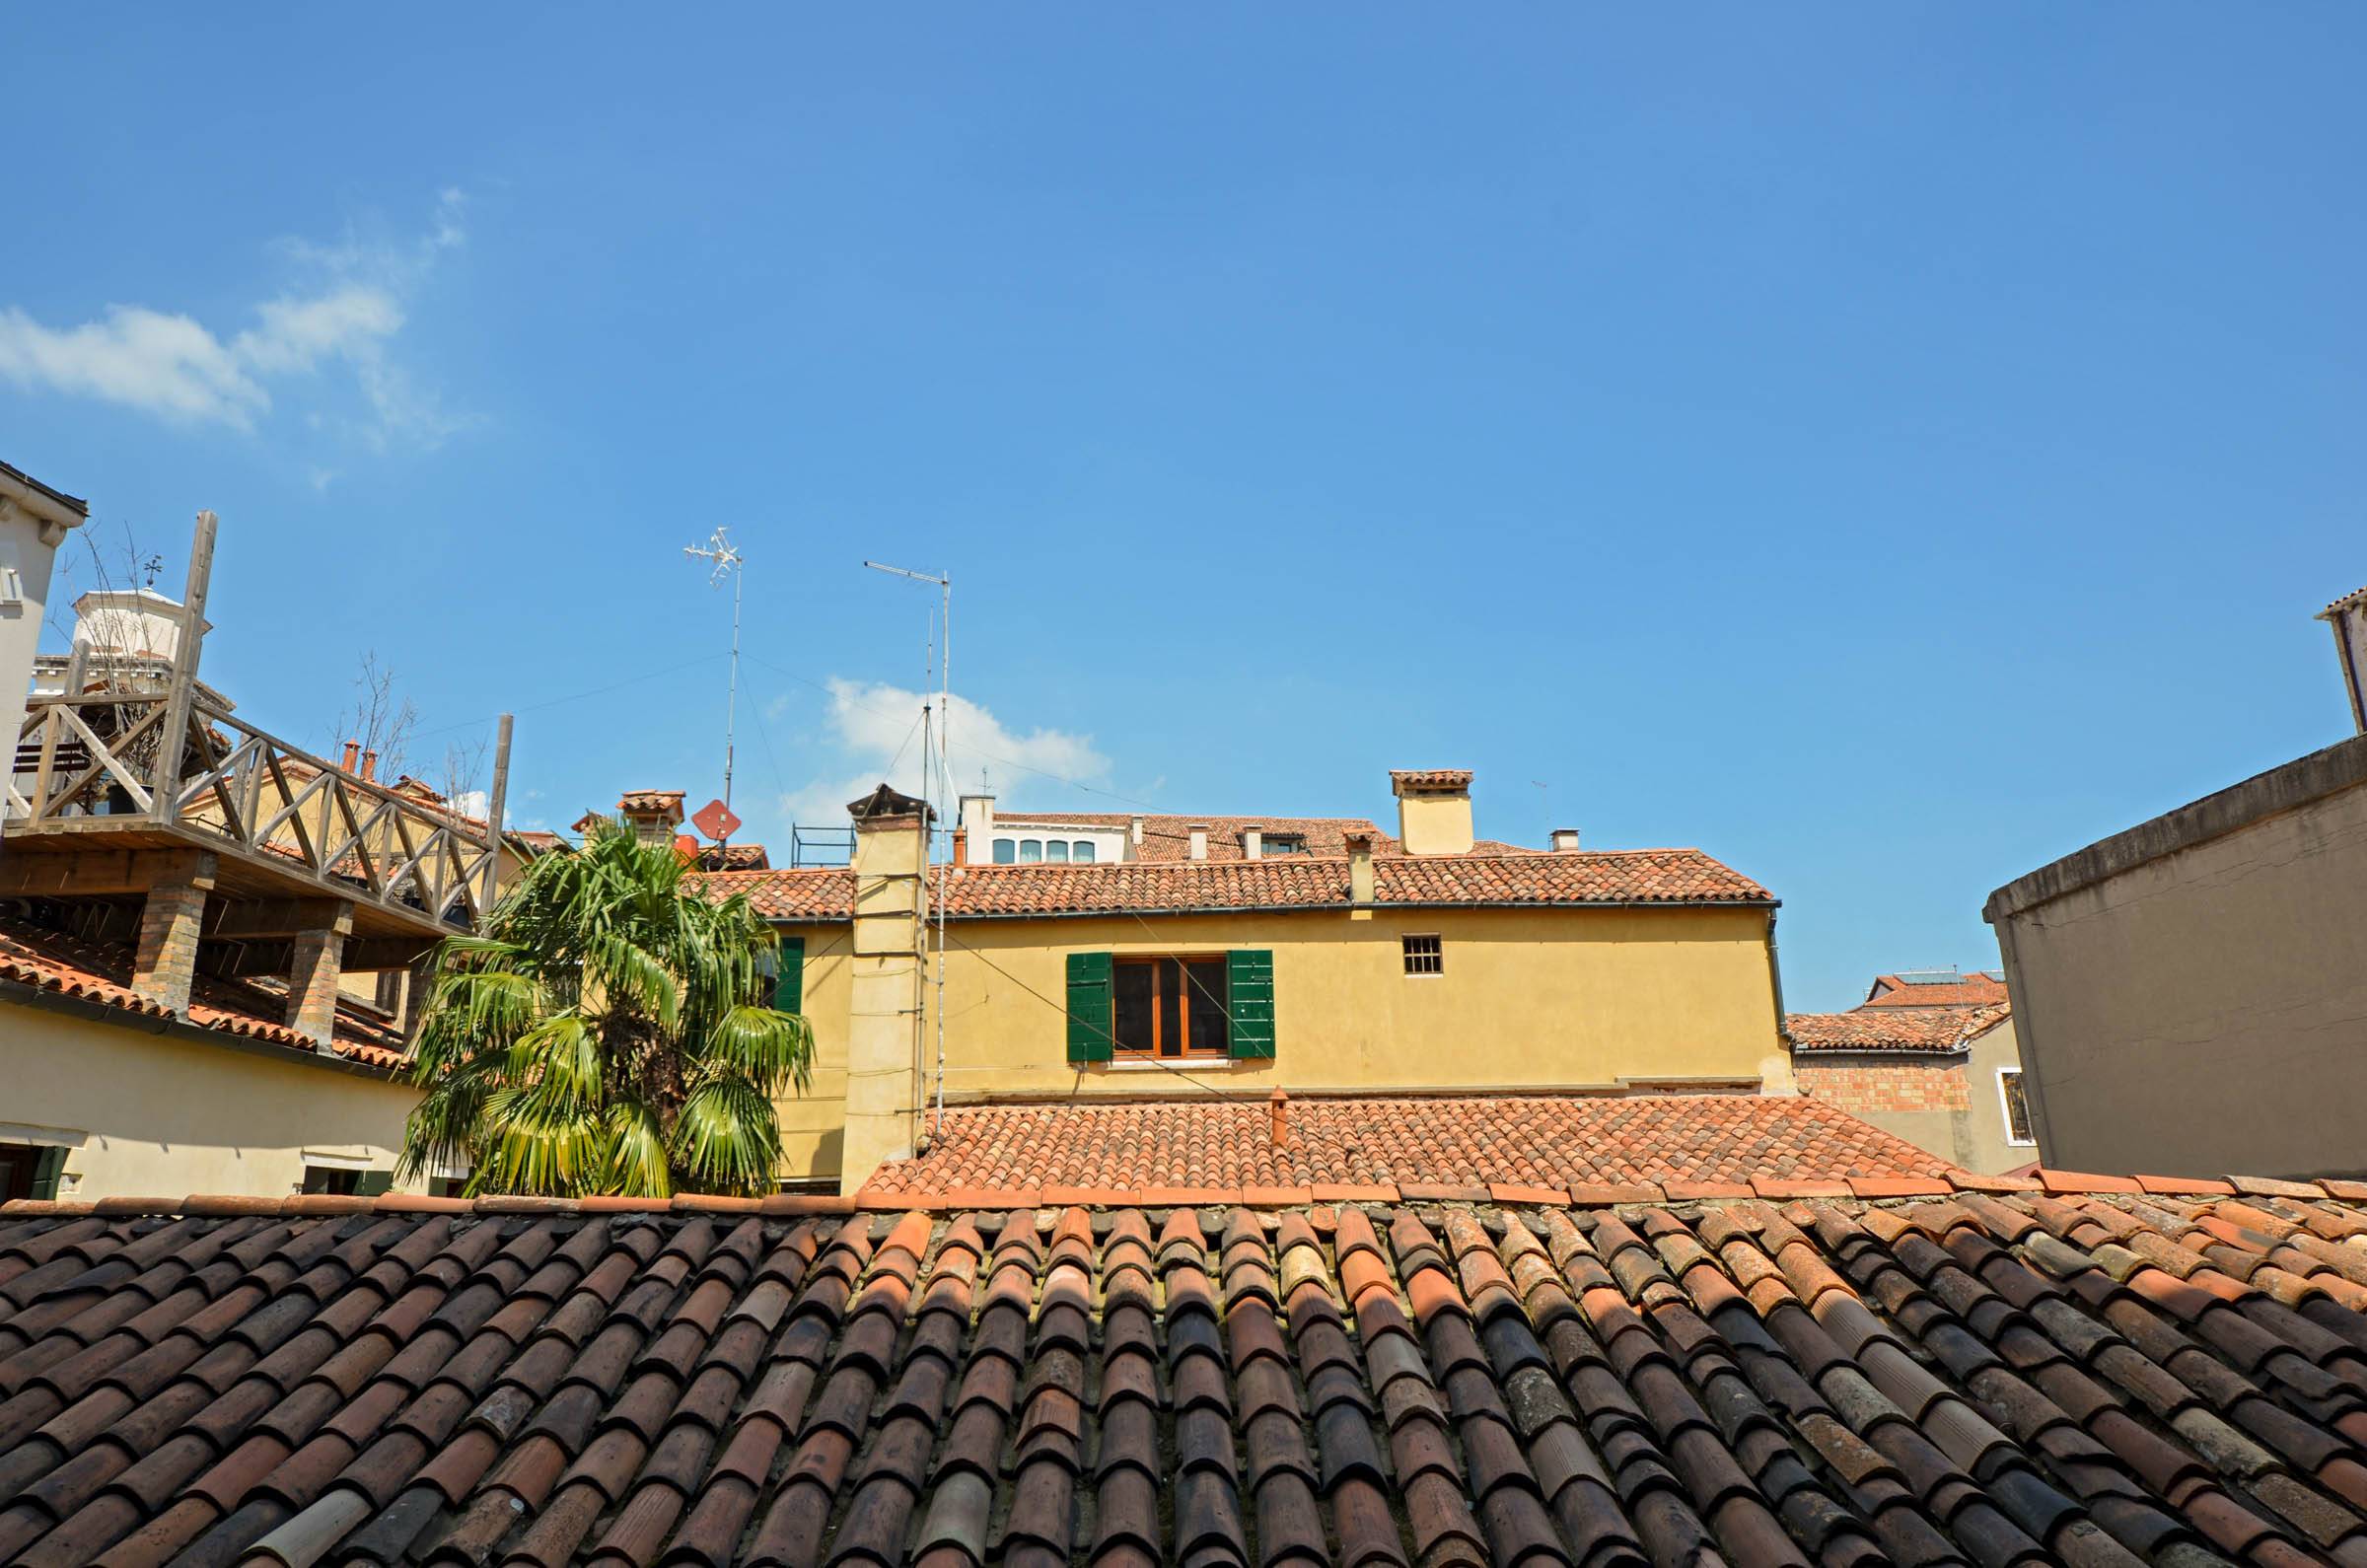 view from the large window on the rooftops